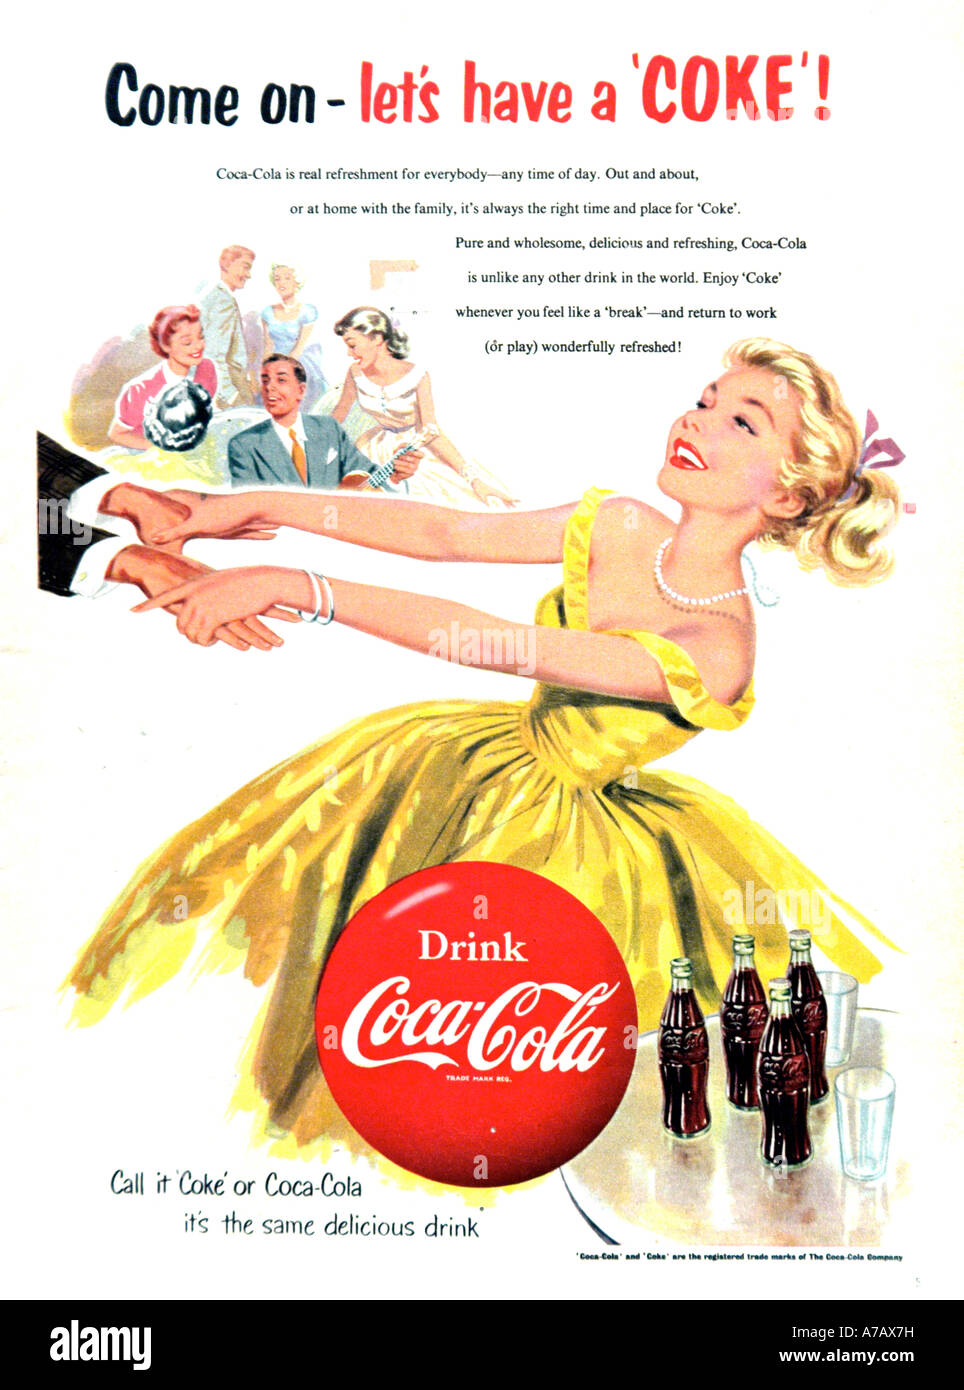 [Image: coca-cola-advert-editorial-use-only-A7AX7H.jpg]